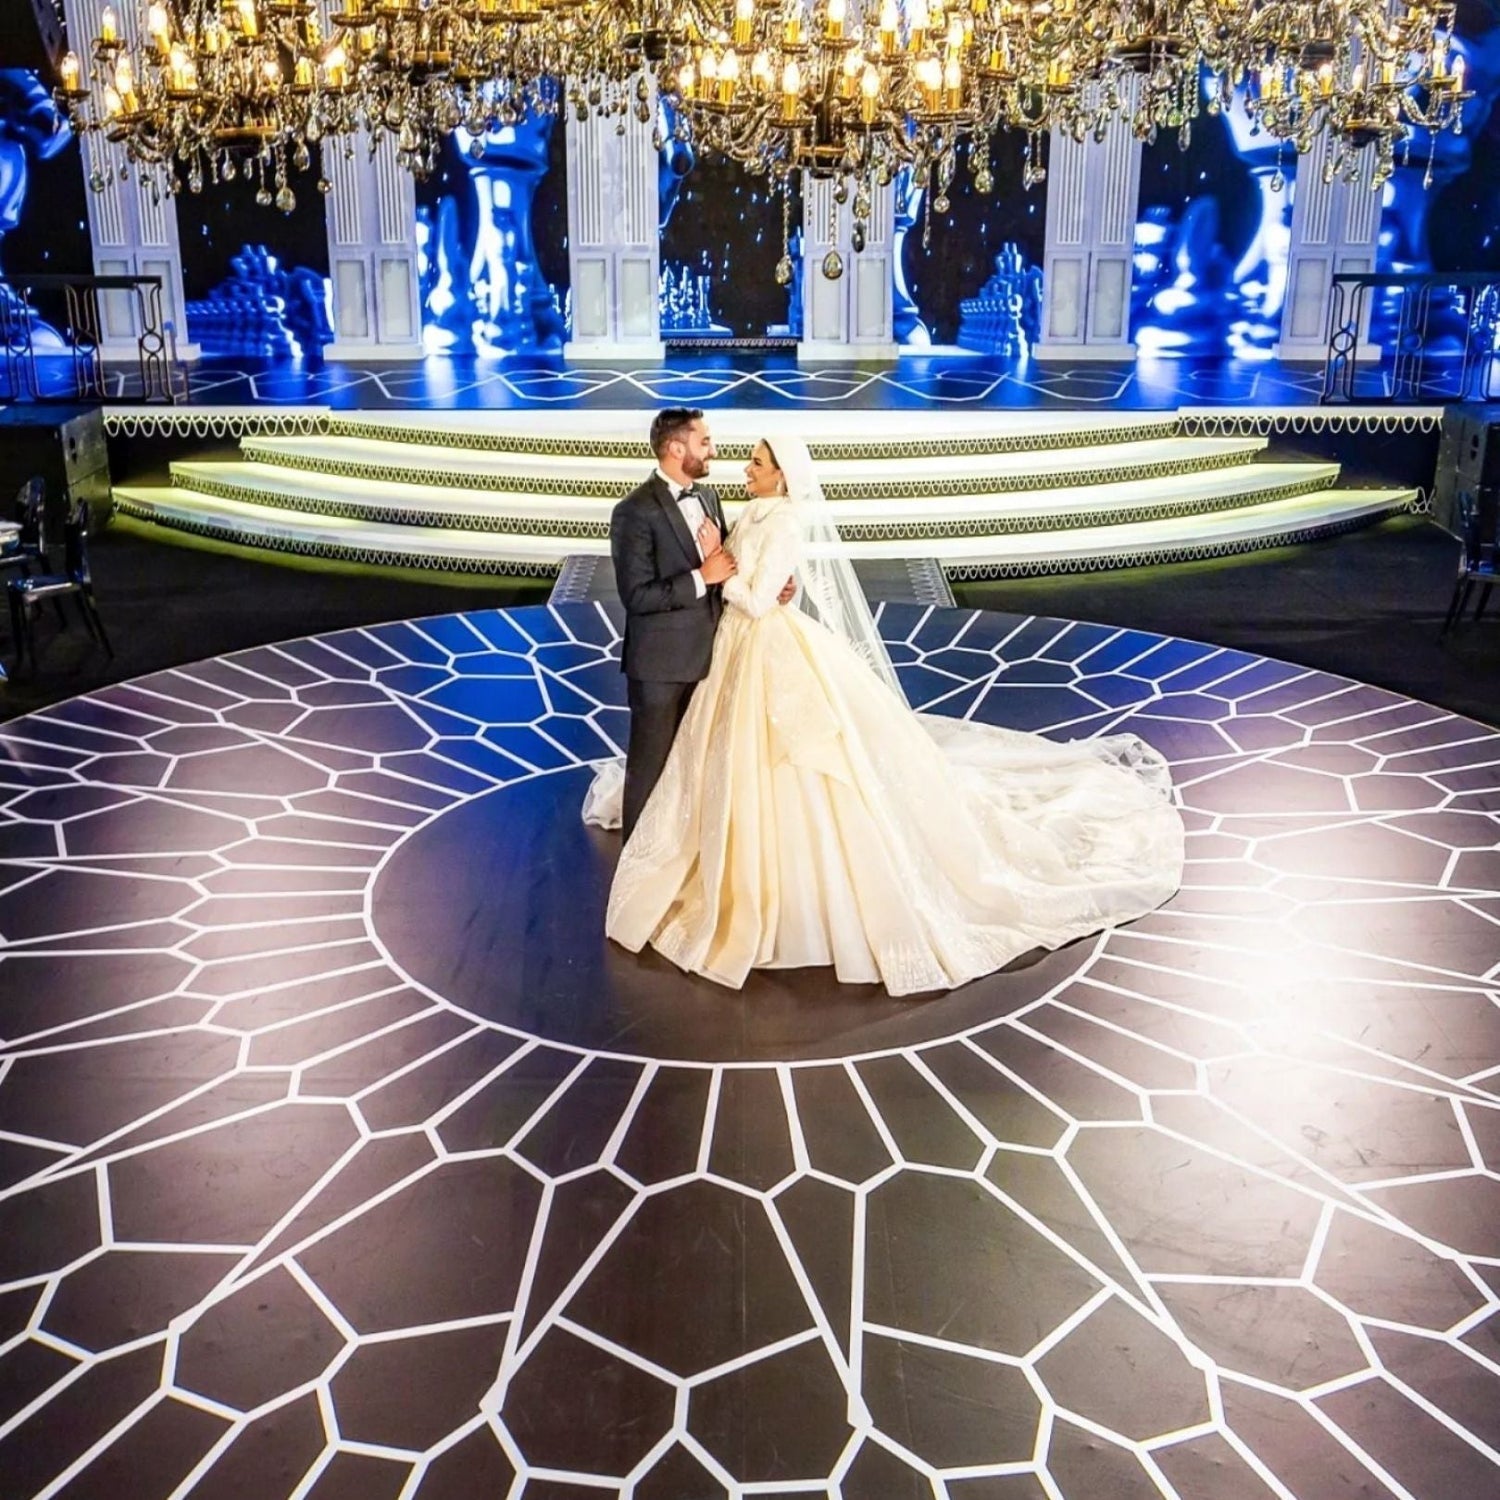 Round dance floor for weddings, parties & events. Glossy or matte finishing. Event Rentals in Dubai Olga Events. Wedding Planner in Dubai  Wedding coordination, wedding timeline & schedule. Party organizing, event management, vendor coordination. Party planner & hostessing. Full Event Planning Package